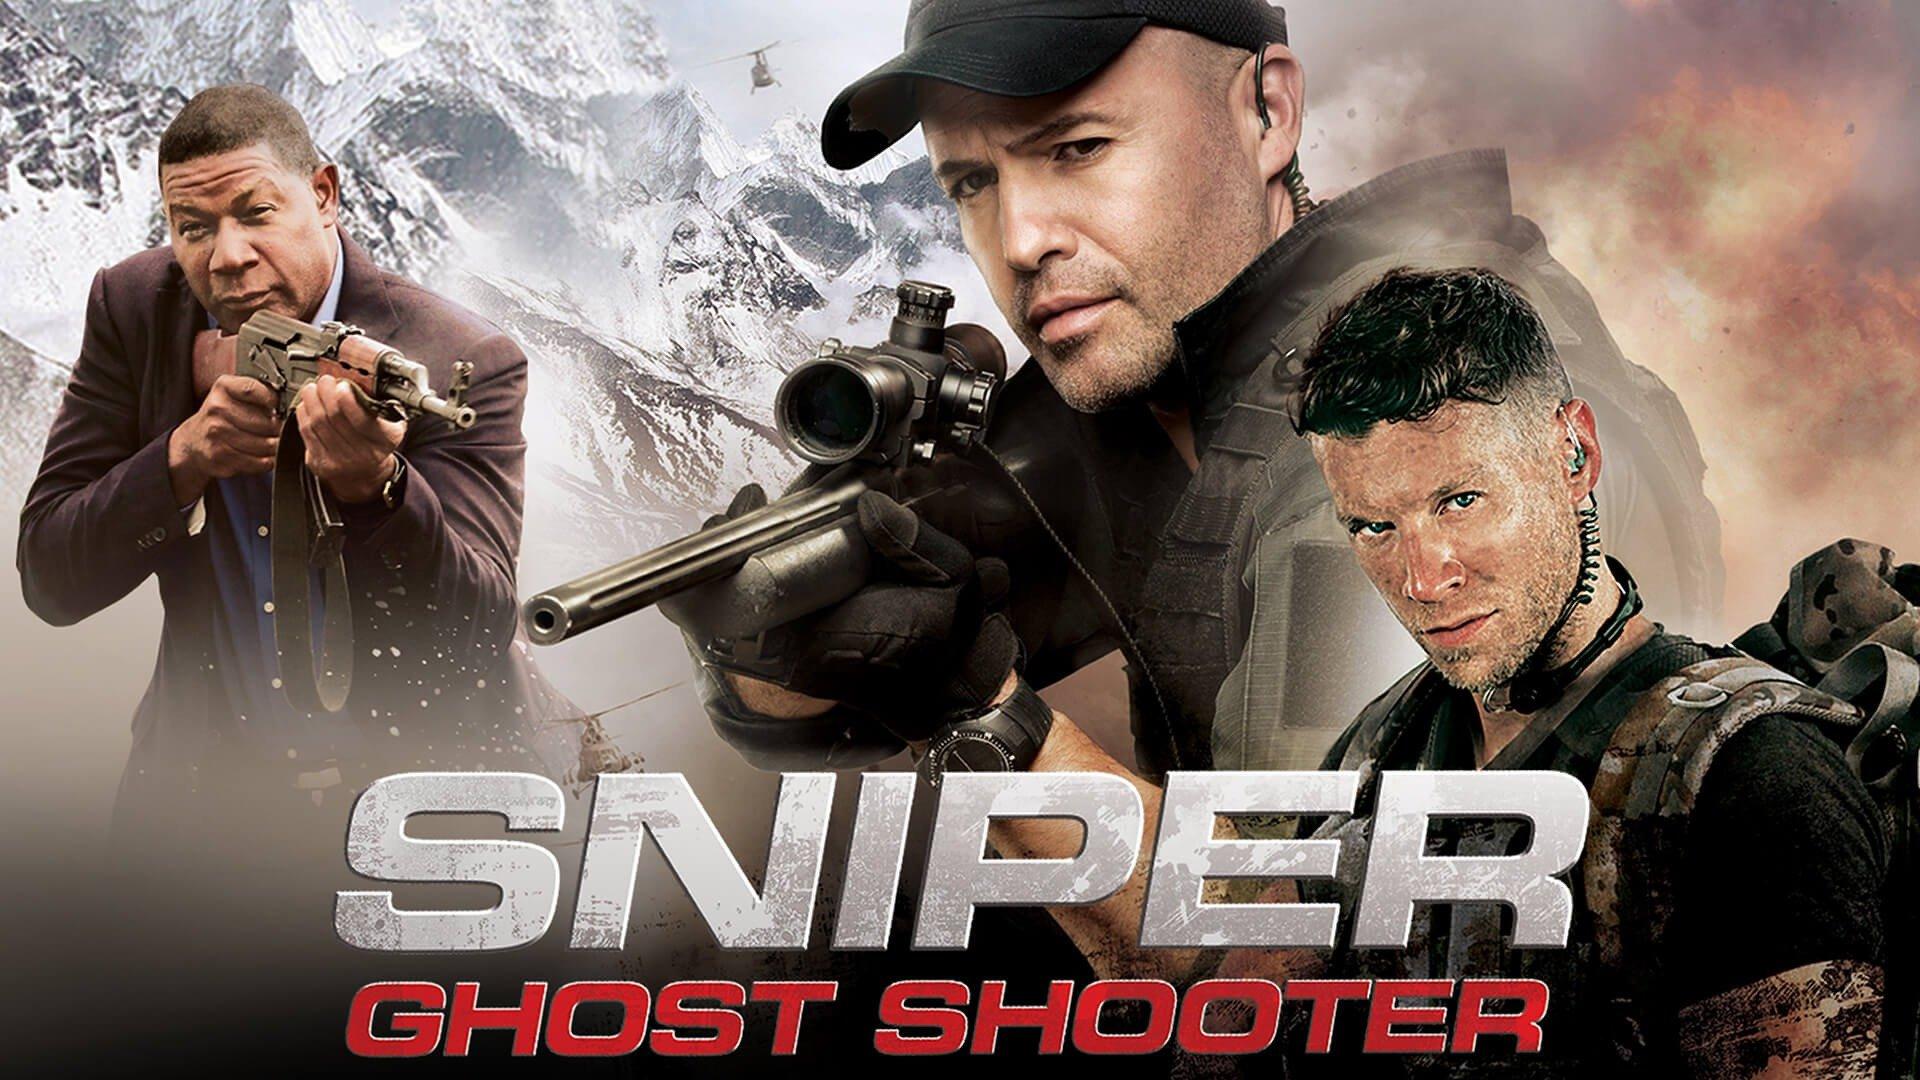 Watch Sniper Ghost Shooter Streaming Online on Philo (Free Trial)